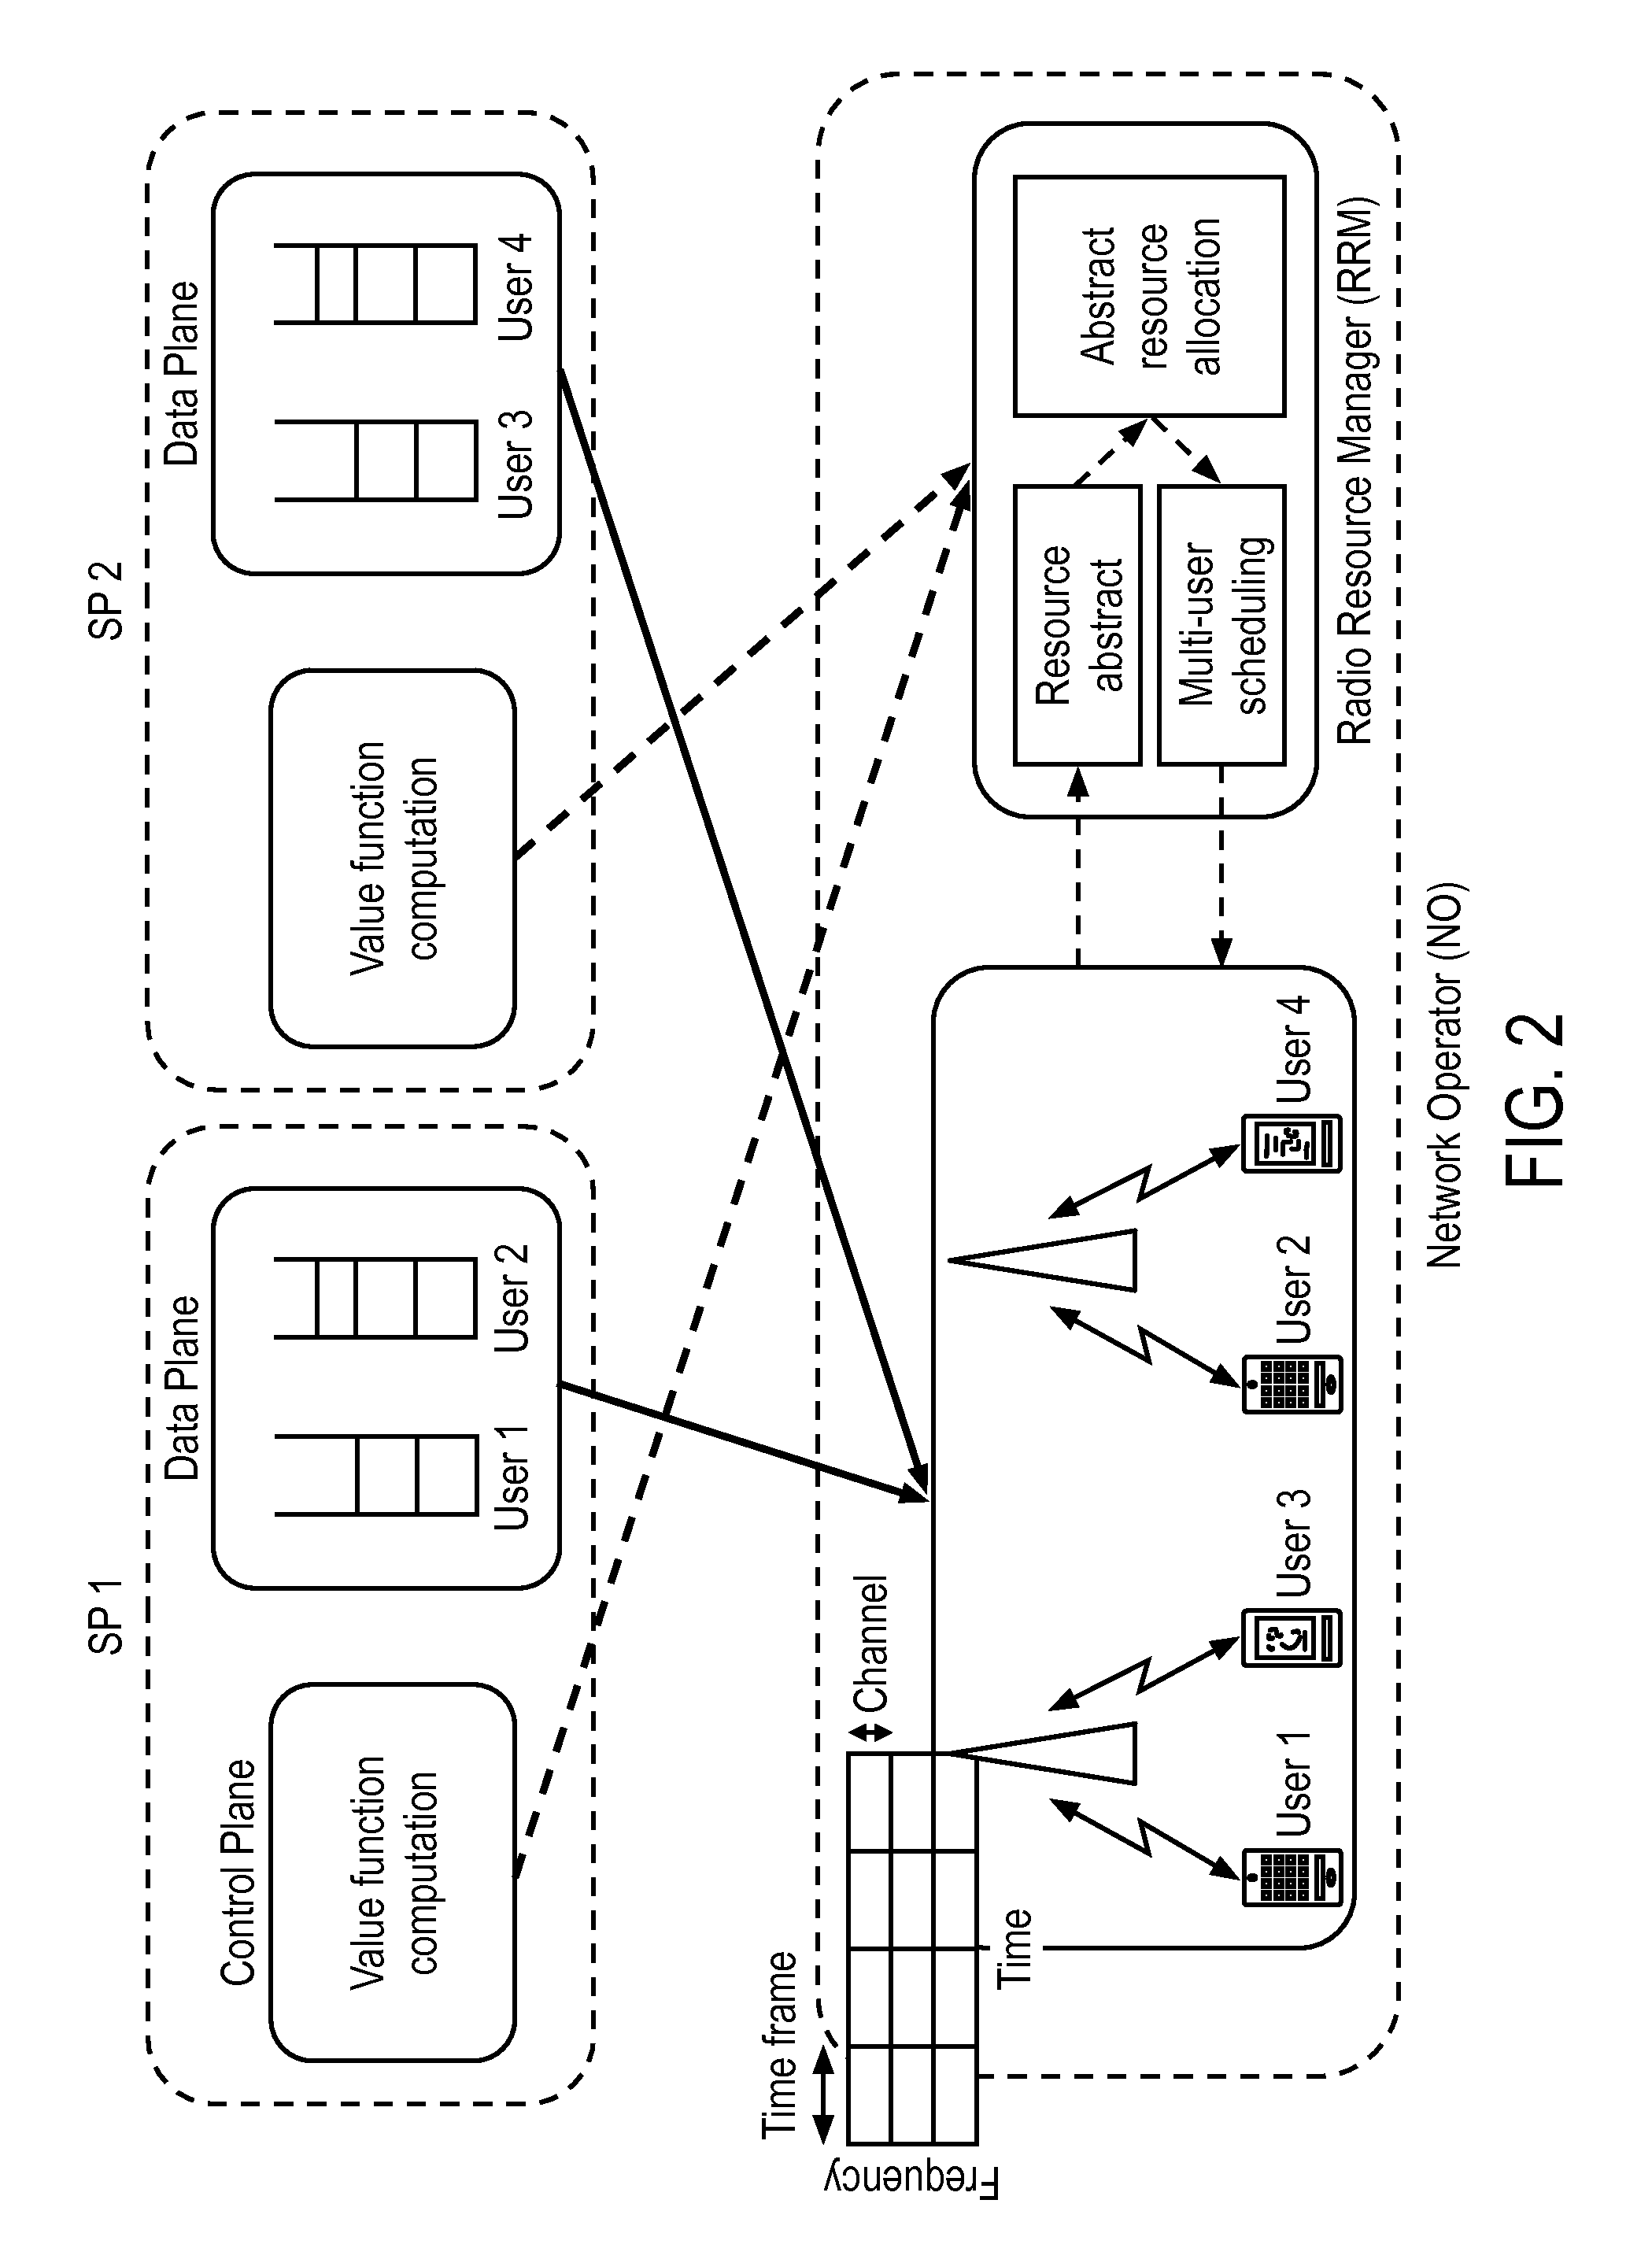 Method for wireless network virtualization through sequential auctions and conjectural pricing